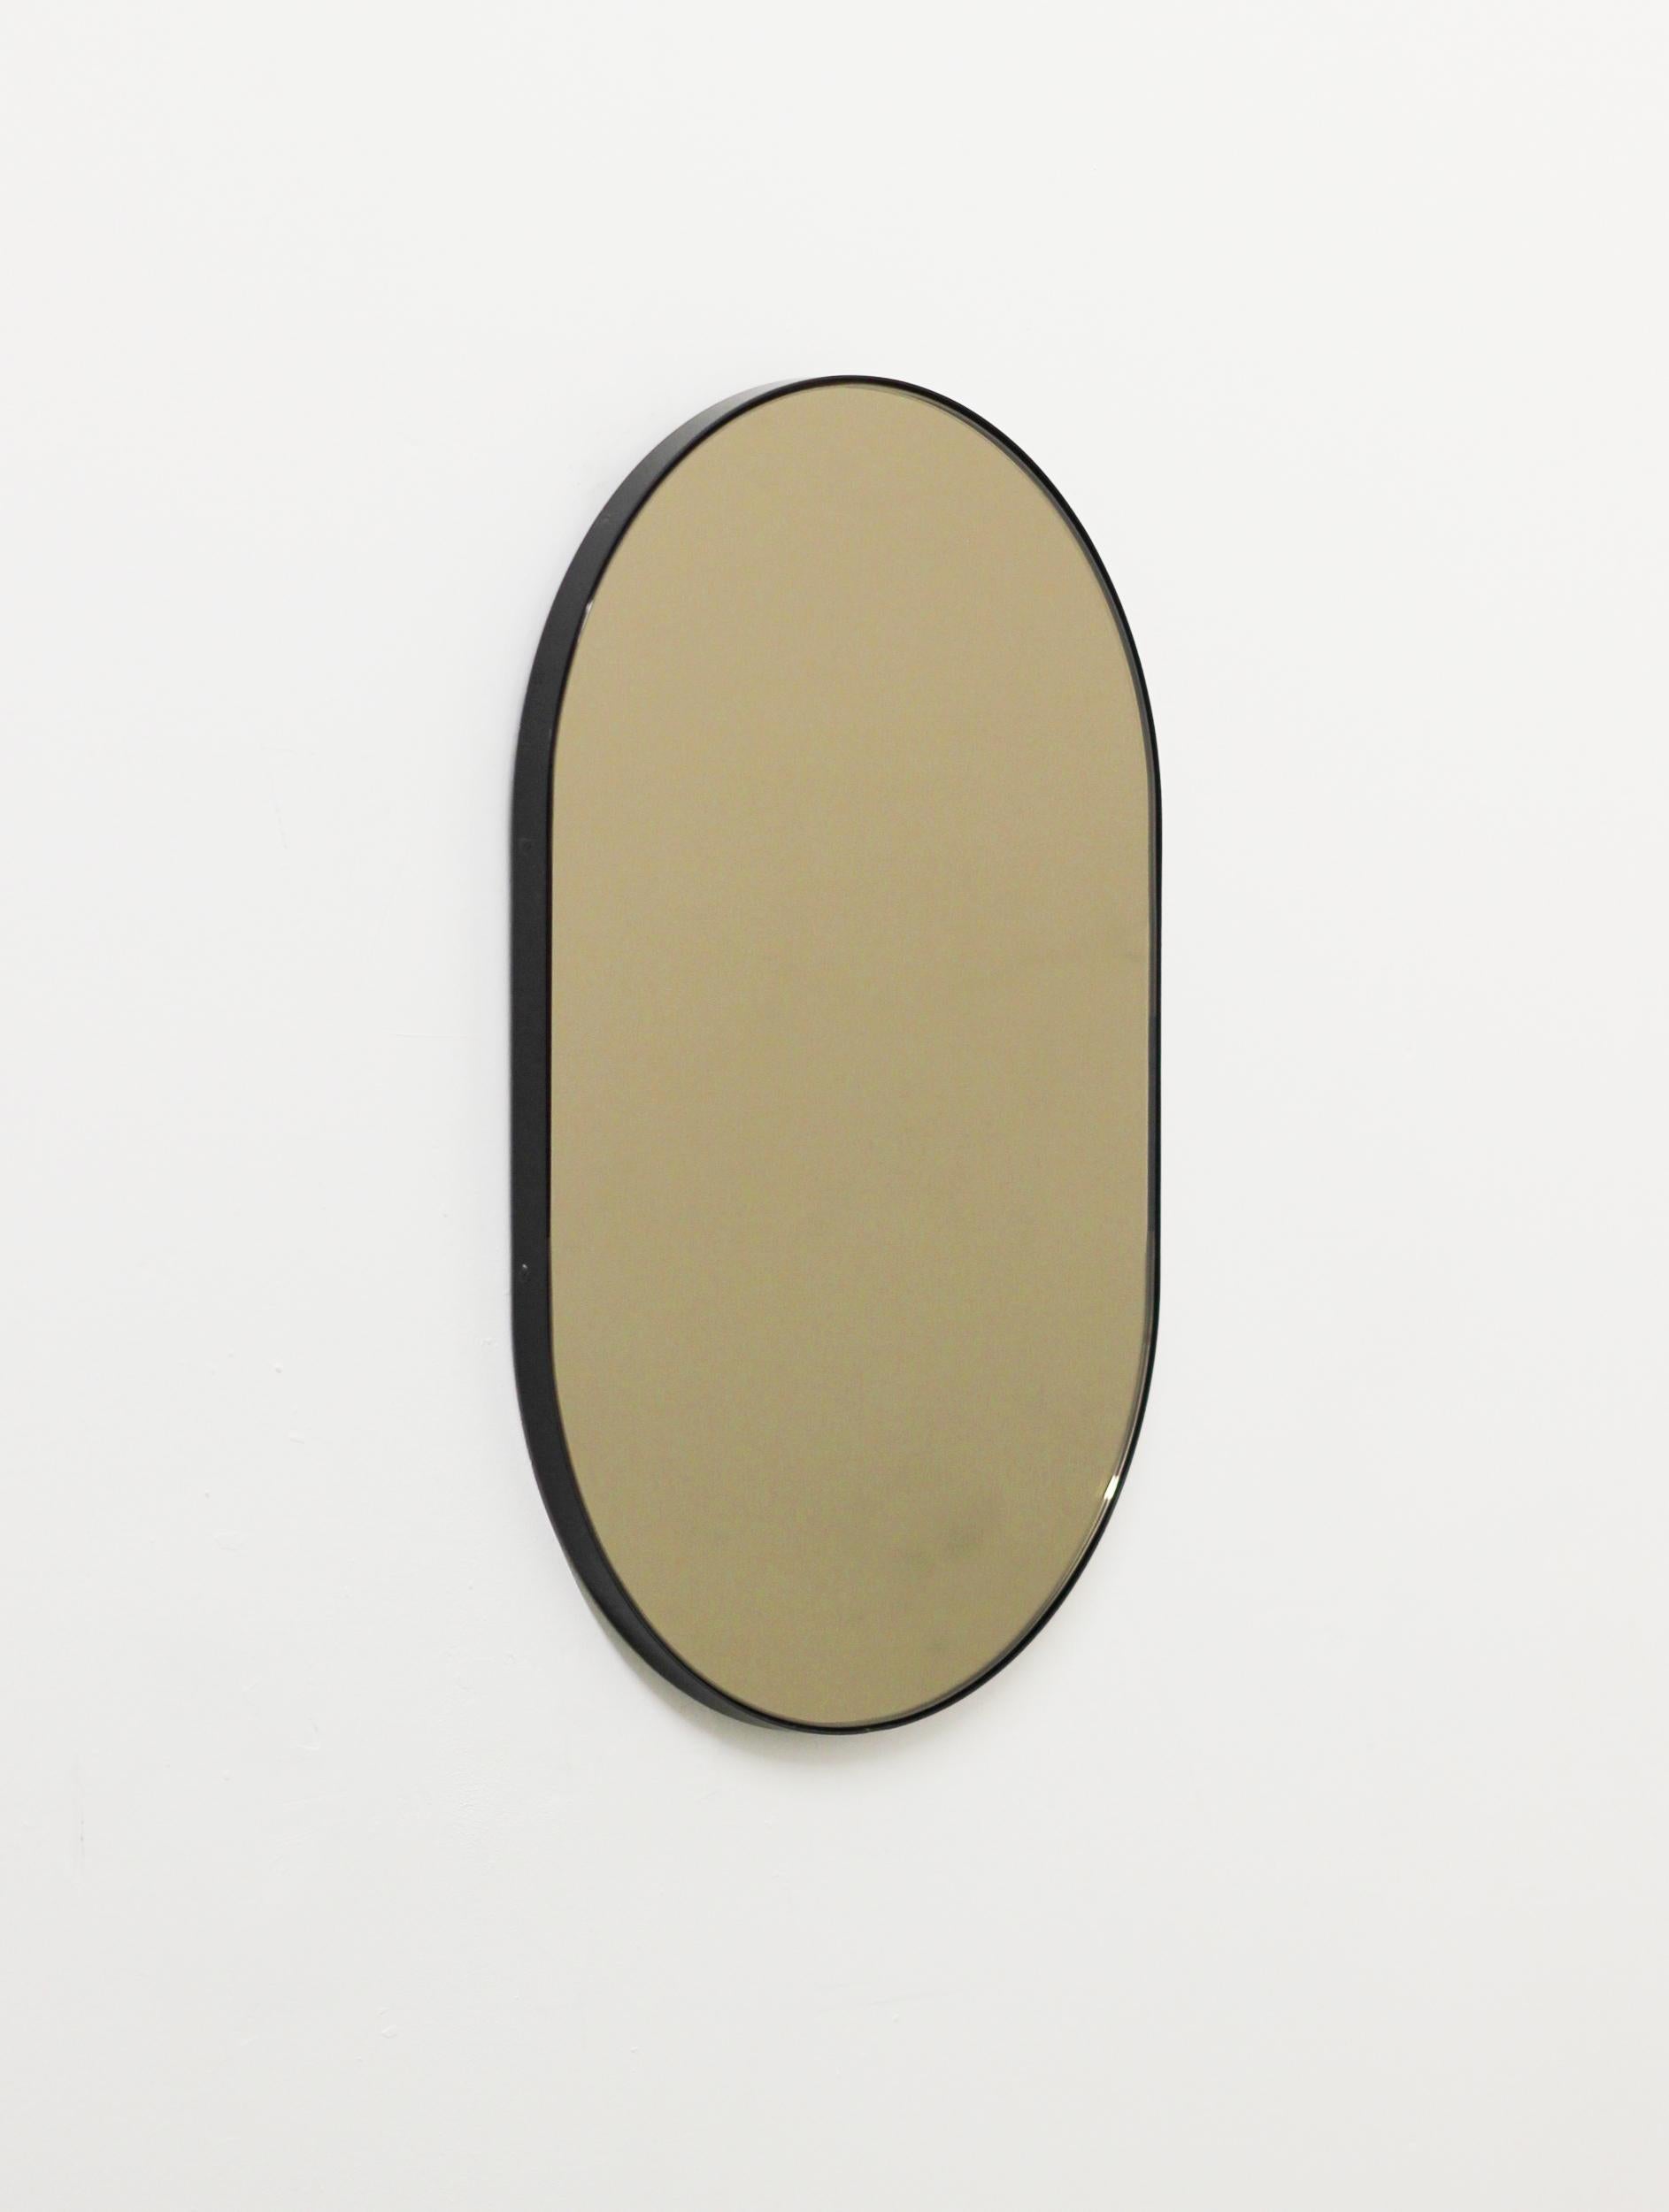 Modern handcrafted capsule shaped bronze tinted mirror with an elegant black powder coated aluminium frame. Designed and handcrafted in London, UK.

Medium, large and extra-large (37cm x 56cm, 46cm x 71cm and 48cm x 97cm) mirrors are fitted with an